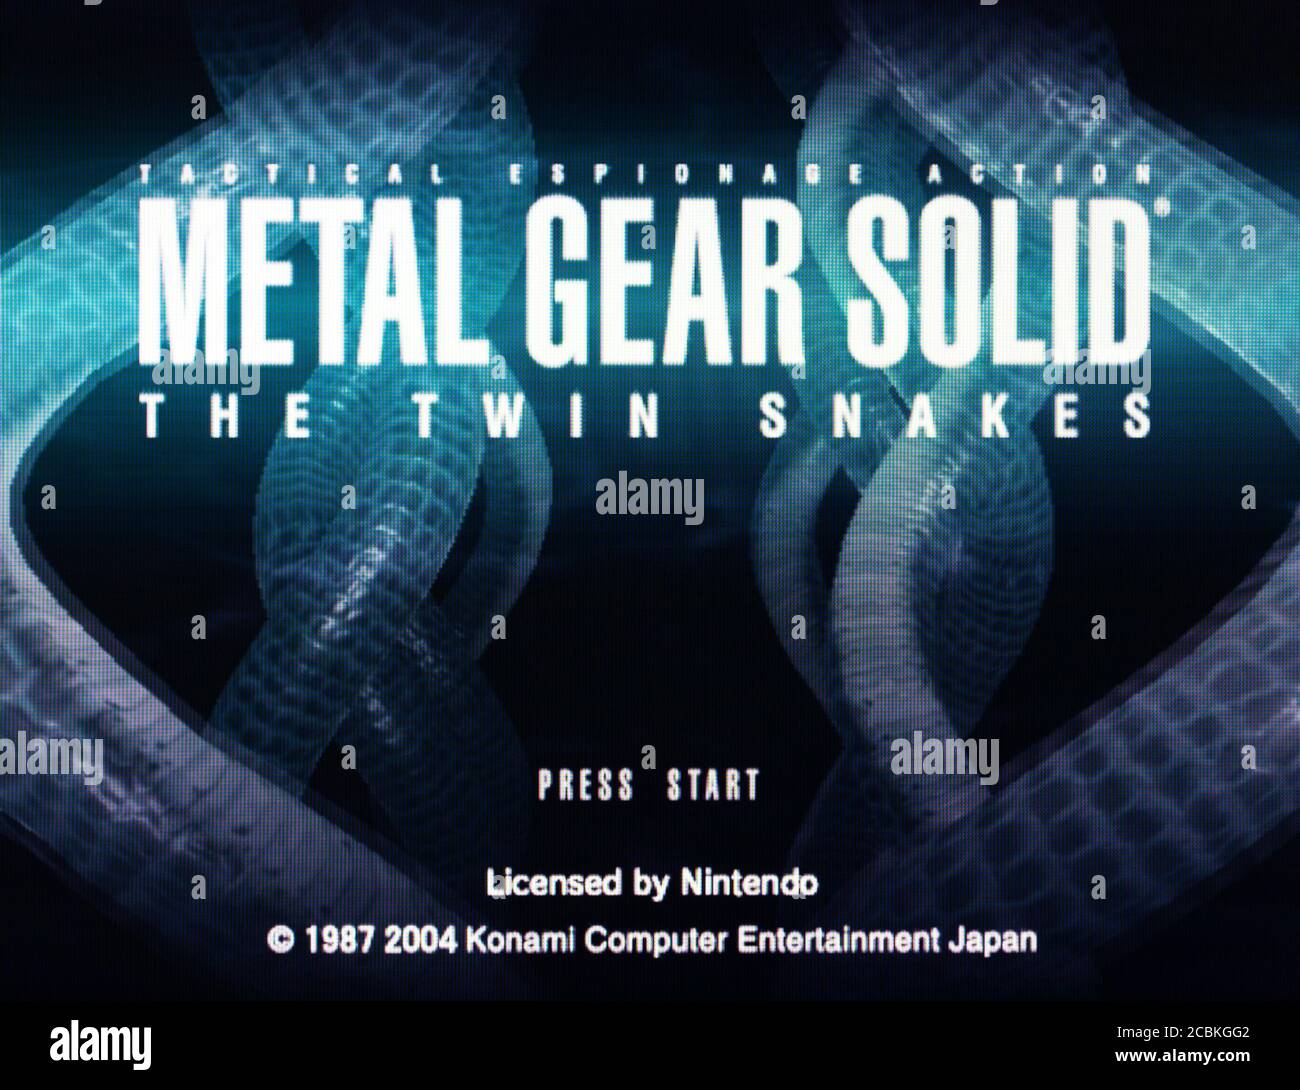 Metal Gear Solid The Twin Snakes - Nintendo Gamecube Videogame - Editorial use only Stock Photo